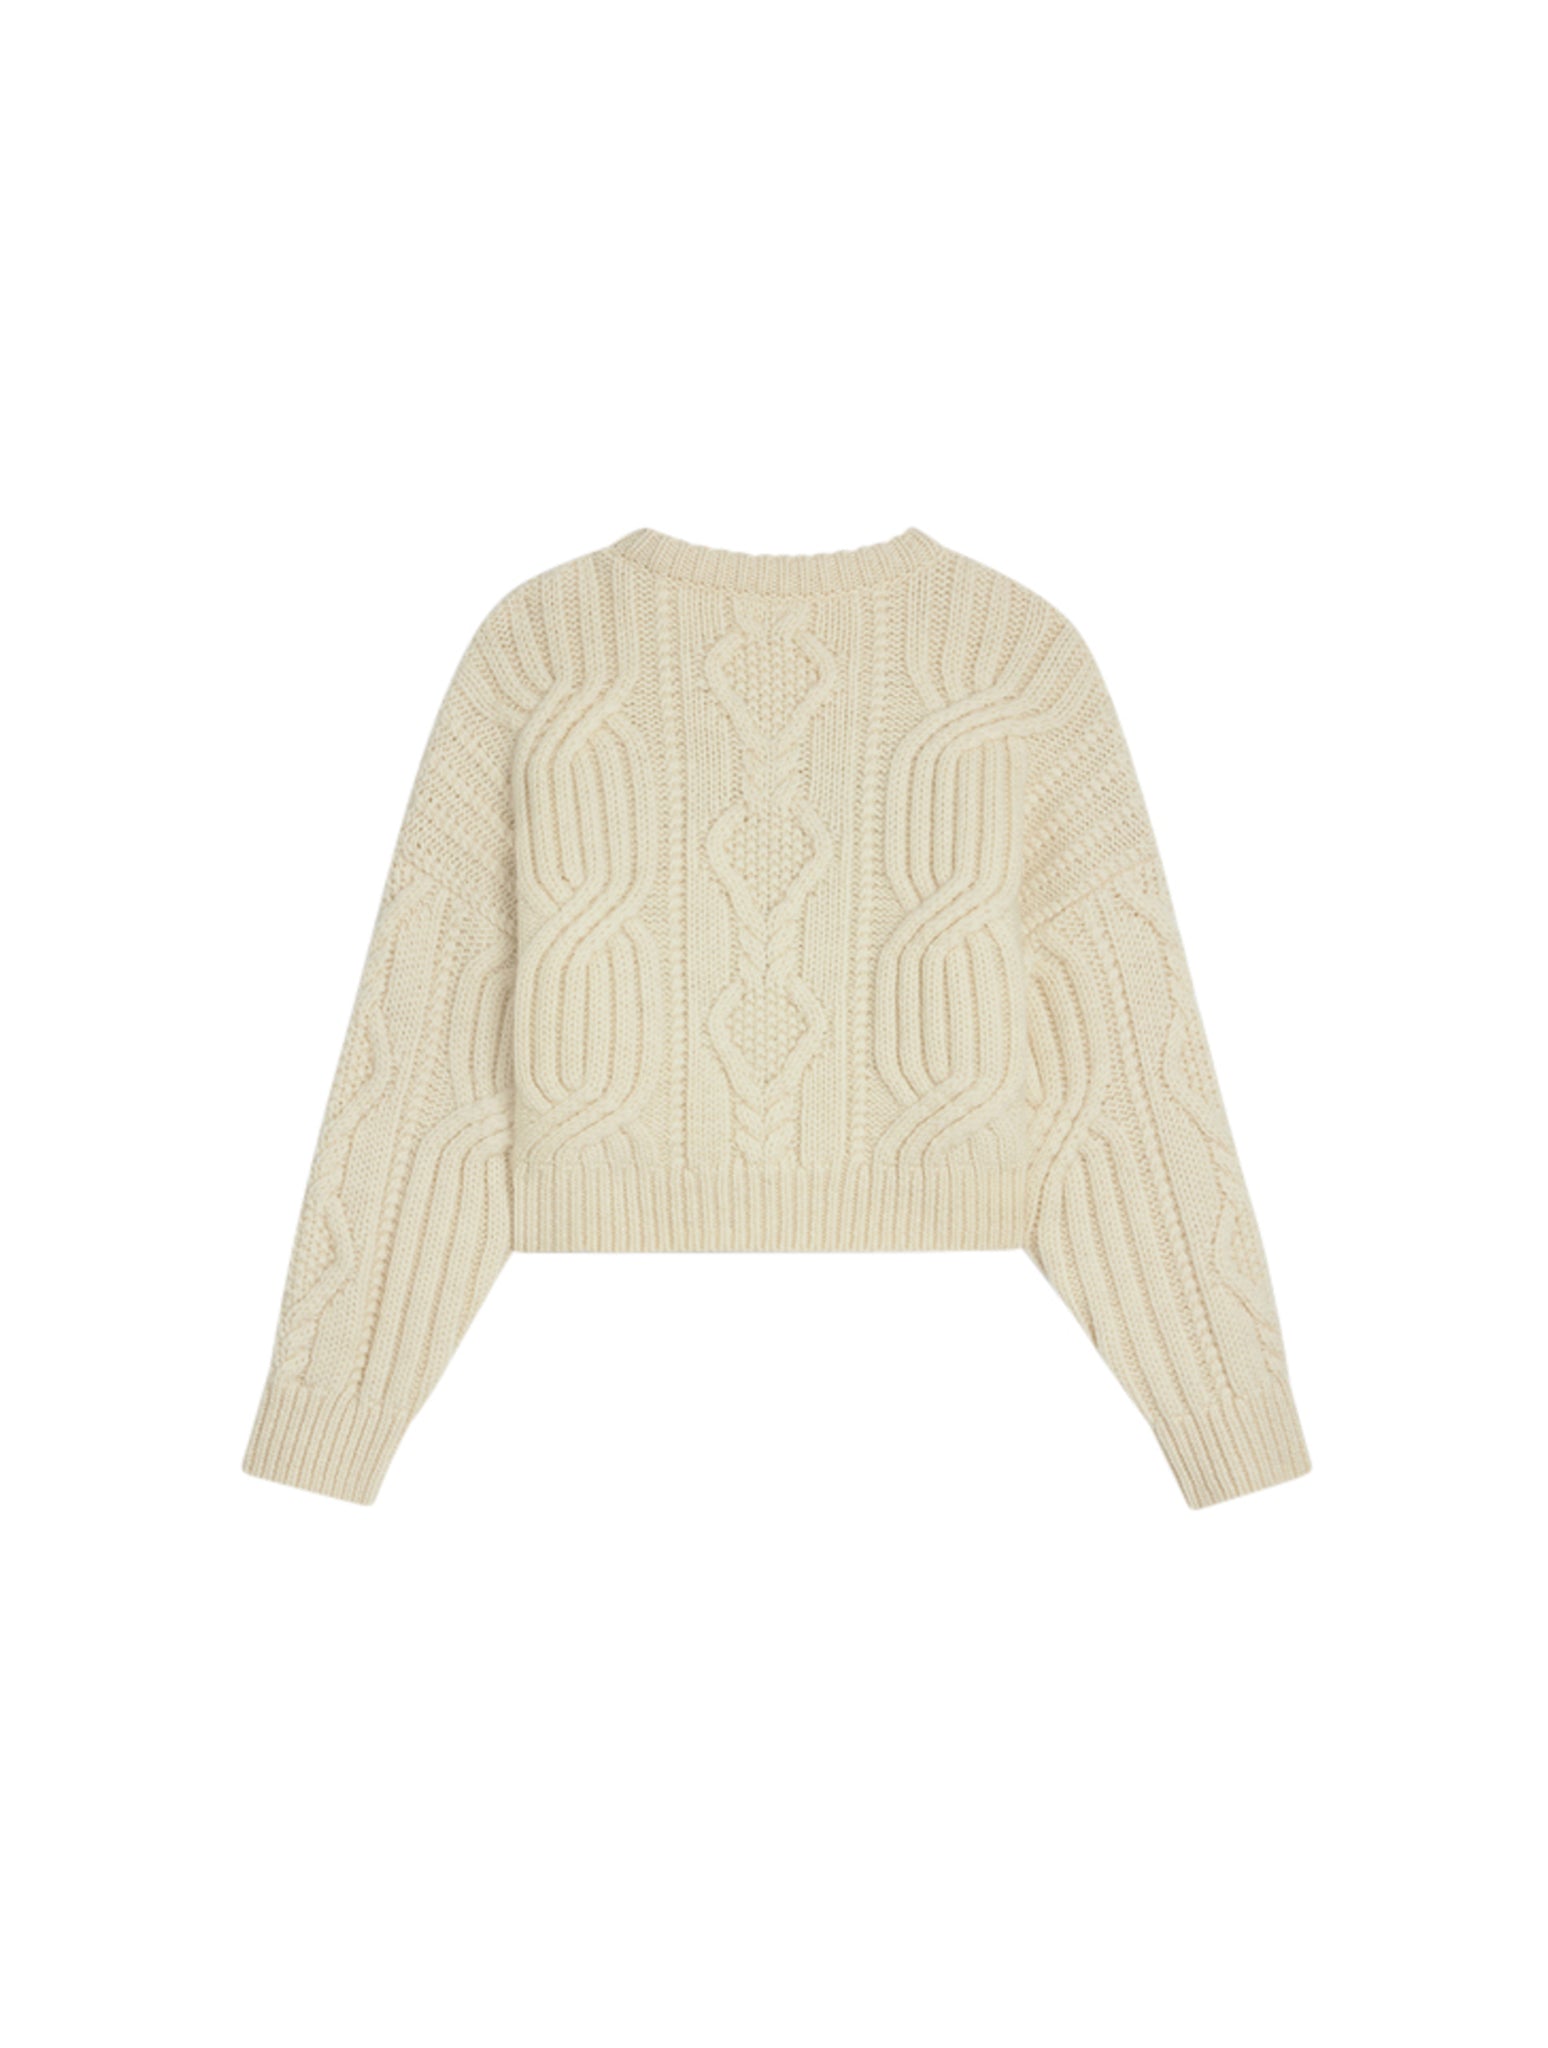 TRIOMPHE CREW NECK SWEATER IN WOOL